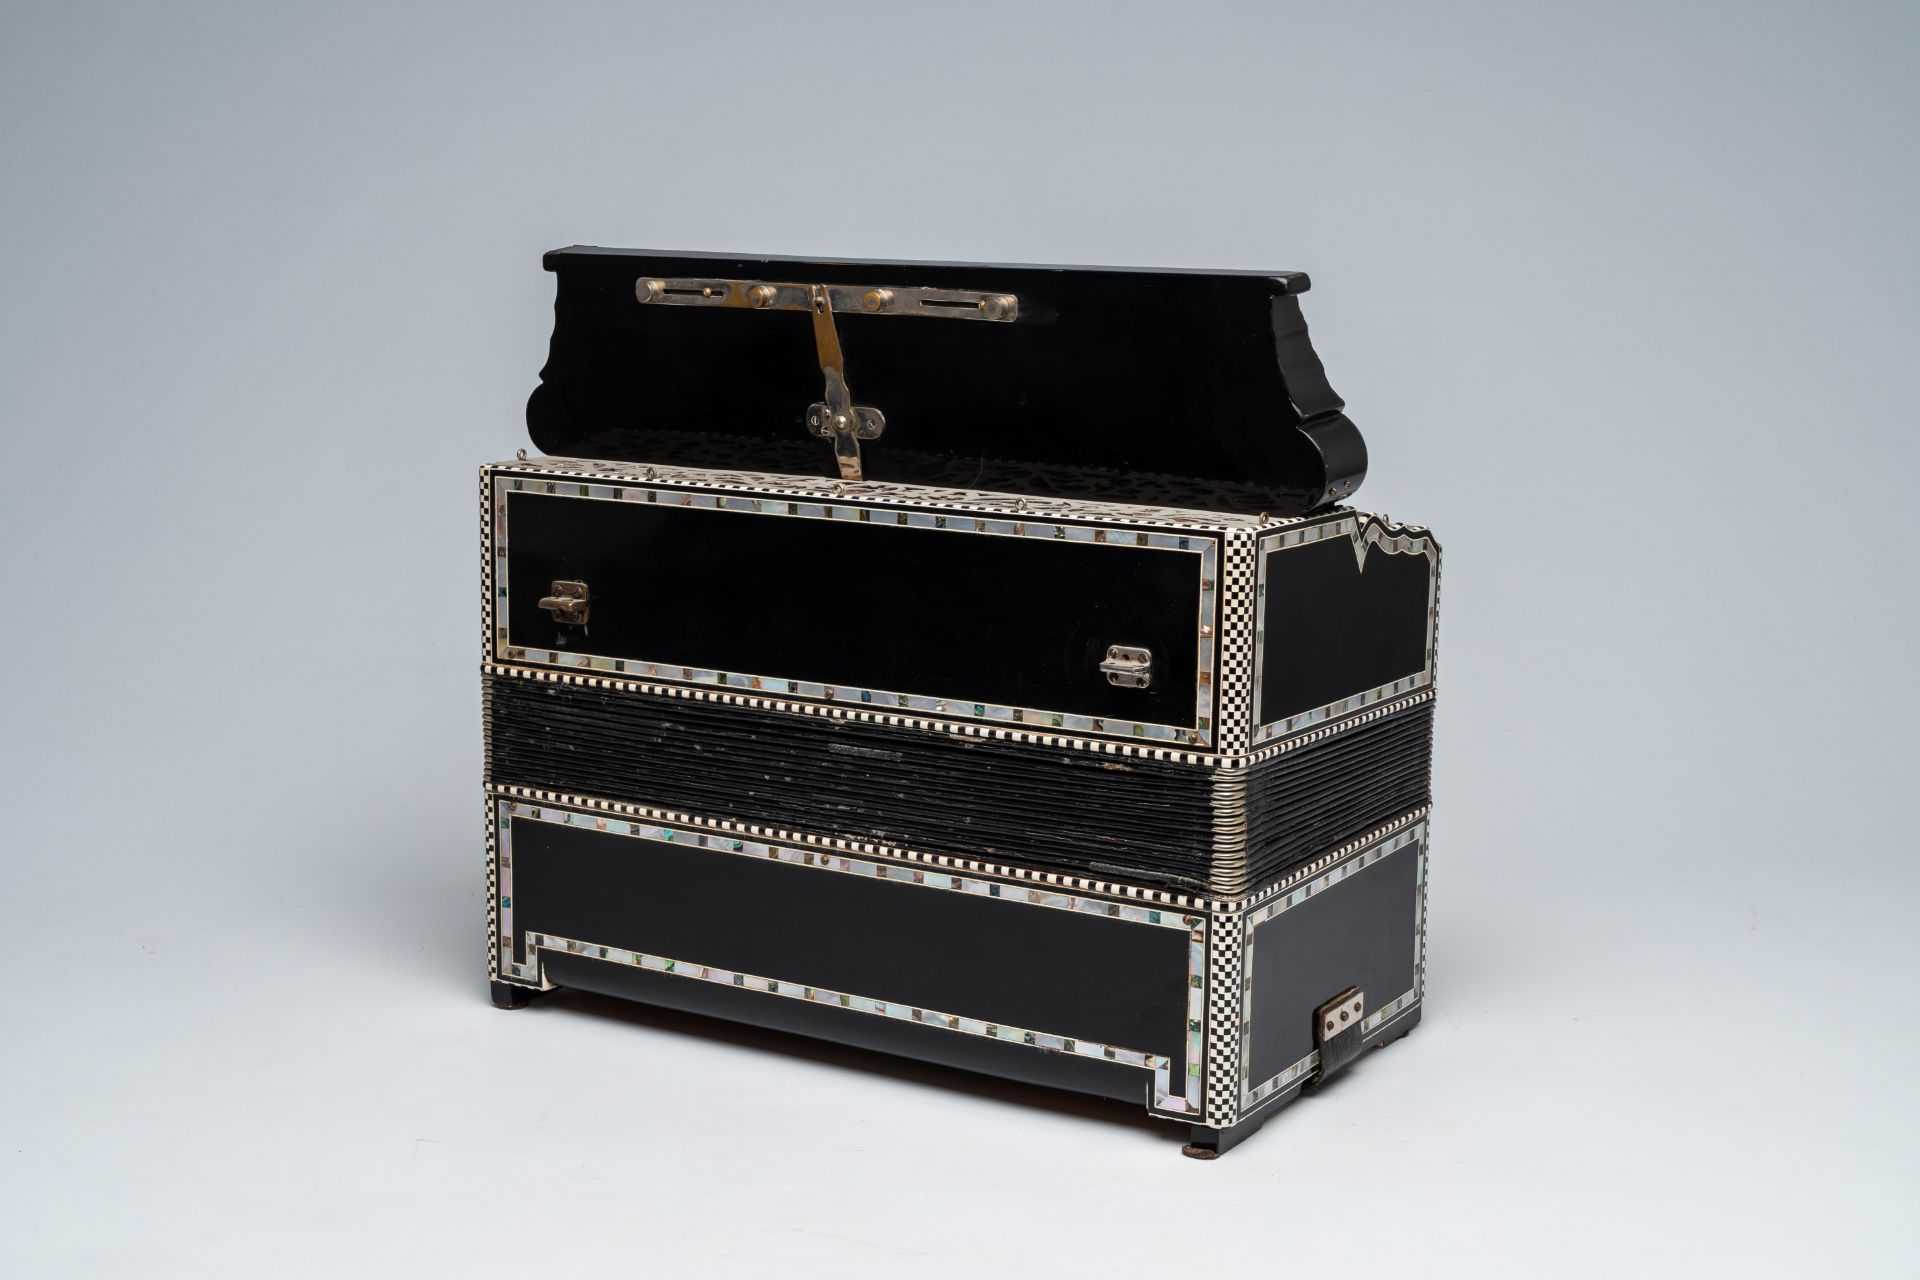 An Italian 'Maximilien Vichoff' chromatic accordion with button keyboard and box, ca. 1930 - Image 4 of 6